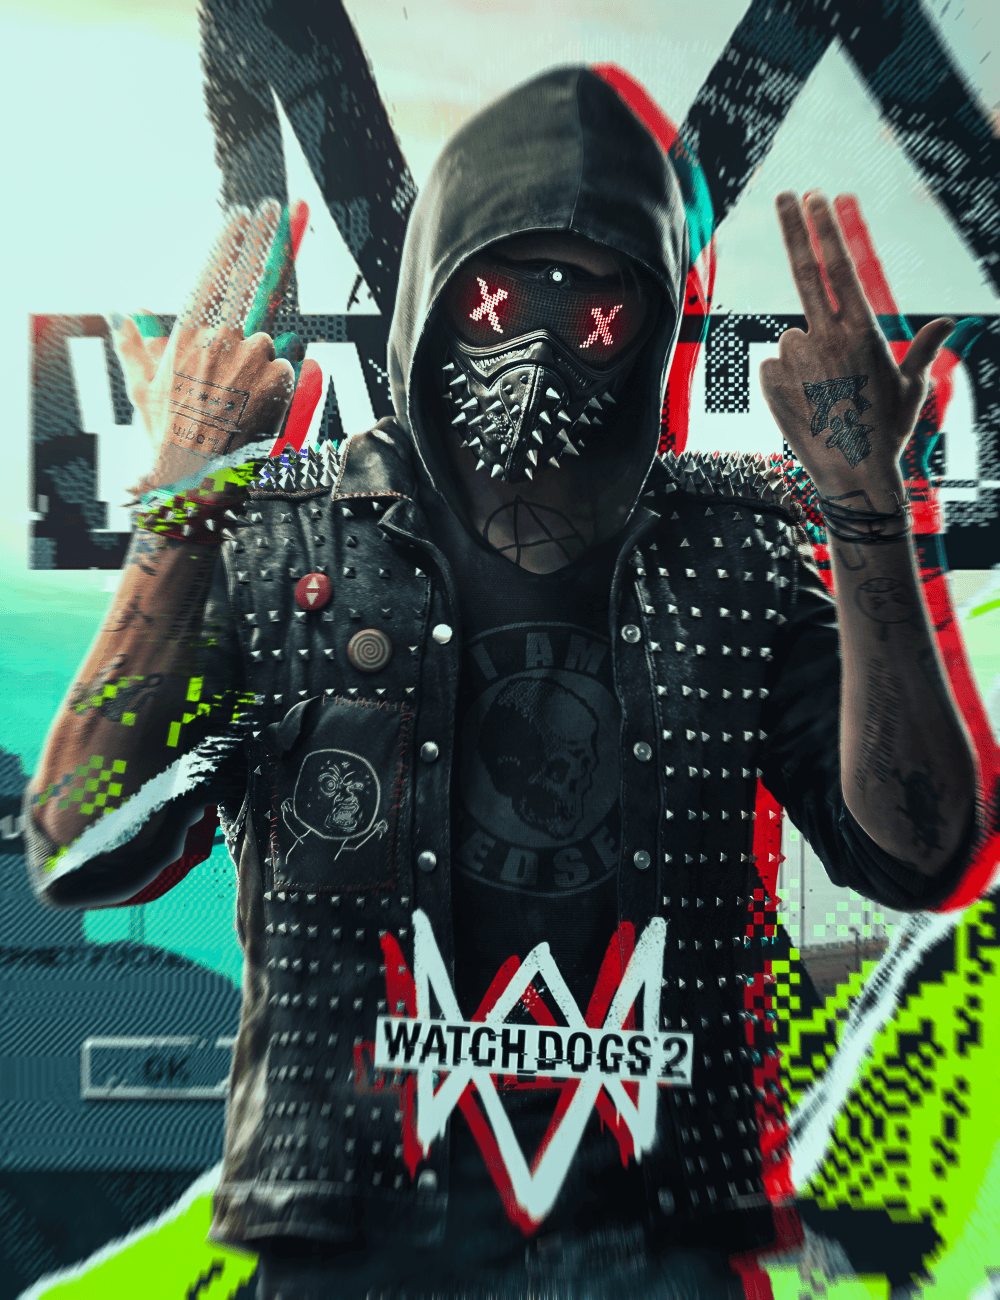 Wrench Watch Dogs Wallpapers - Wallpaper Cave